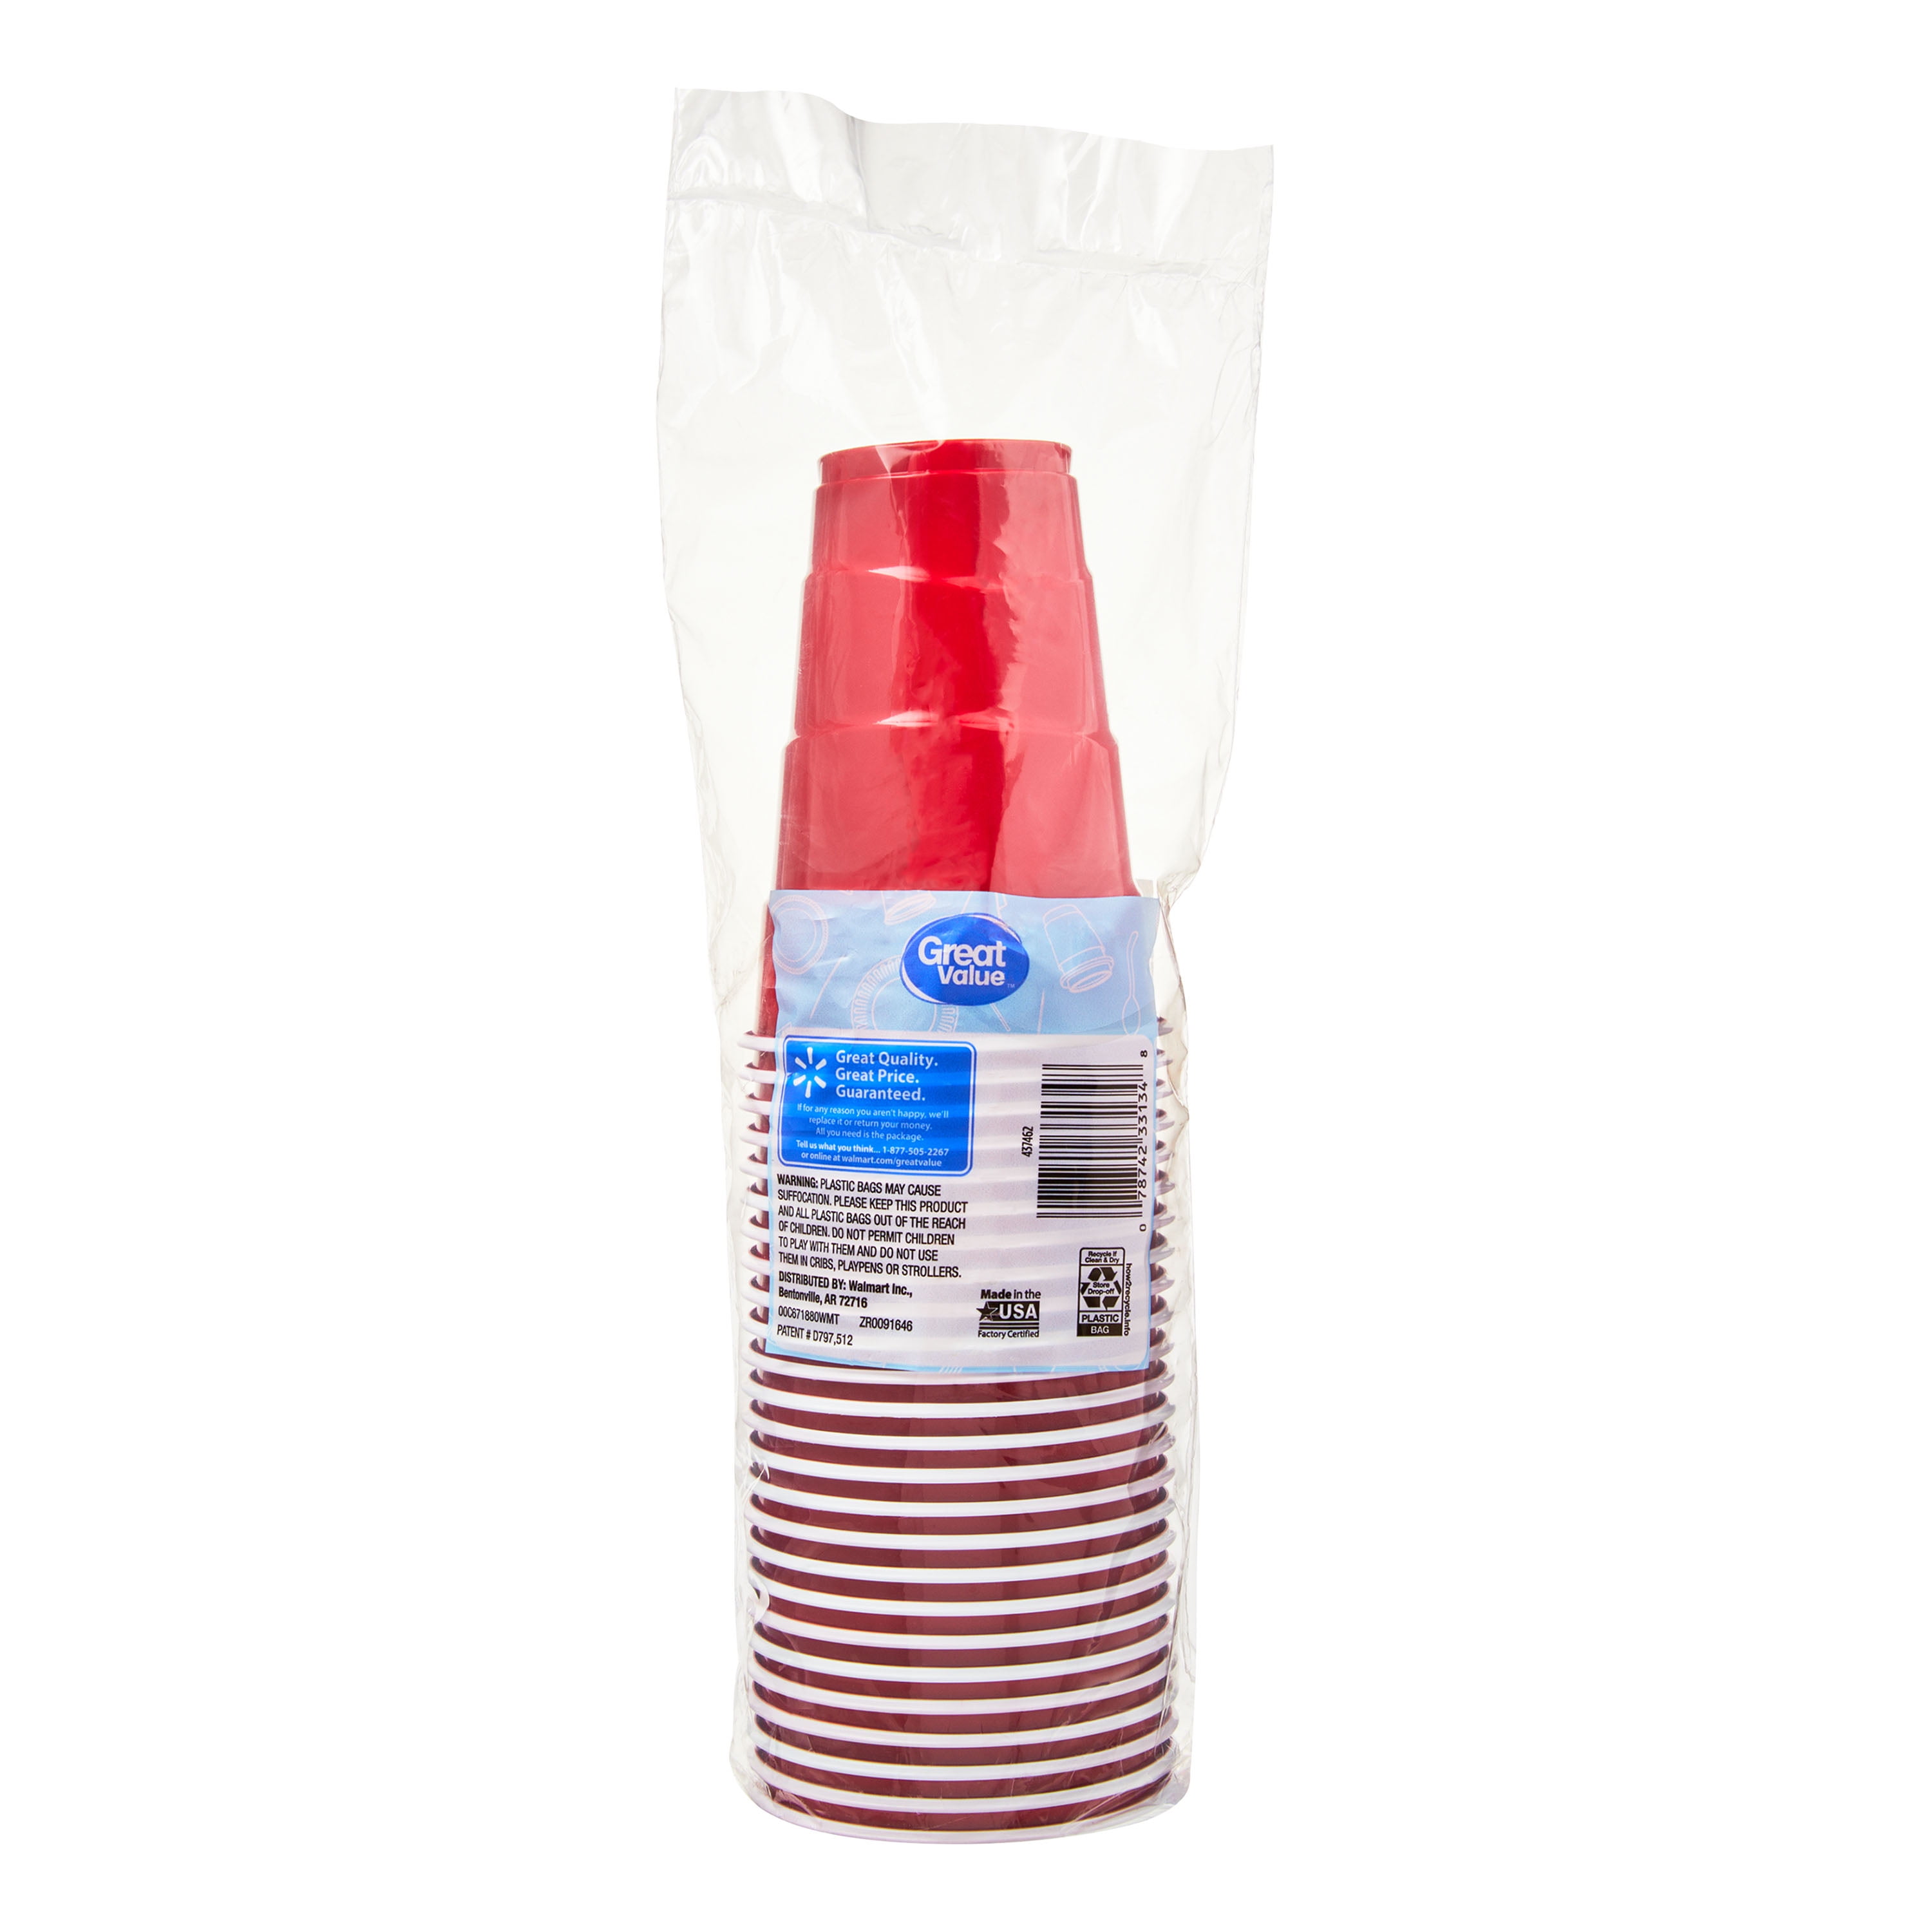 Glad Everyday 18 Oz. Red Plastic Cups (40-Count) - Thomas Do-it Center